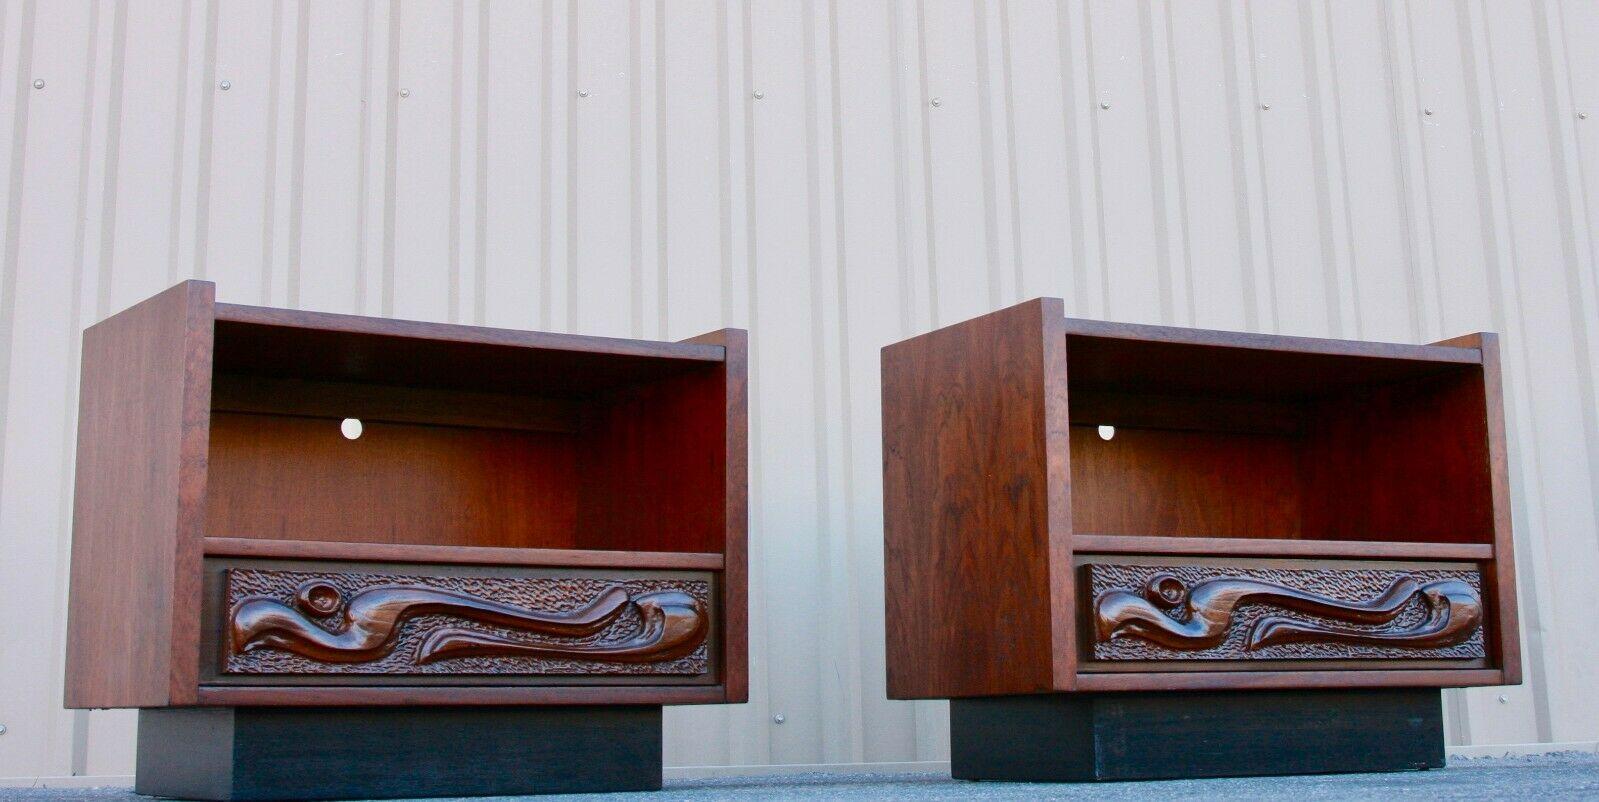 Pair of Mid-Century Modern oceanic sculpted walnut nightstands by Pulaski Furniture Co

This fantastic lacquered sculpted walnut 'Oceanic' pair of nightstands are by Pulaski Furniture Corporation, circa 60’/70’swhich perfectly encapsulates the